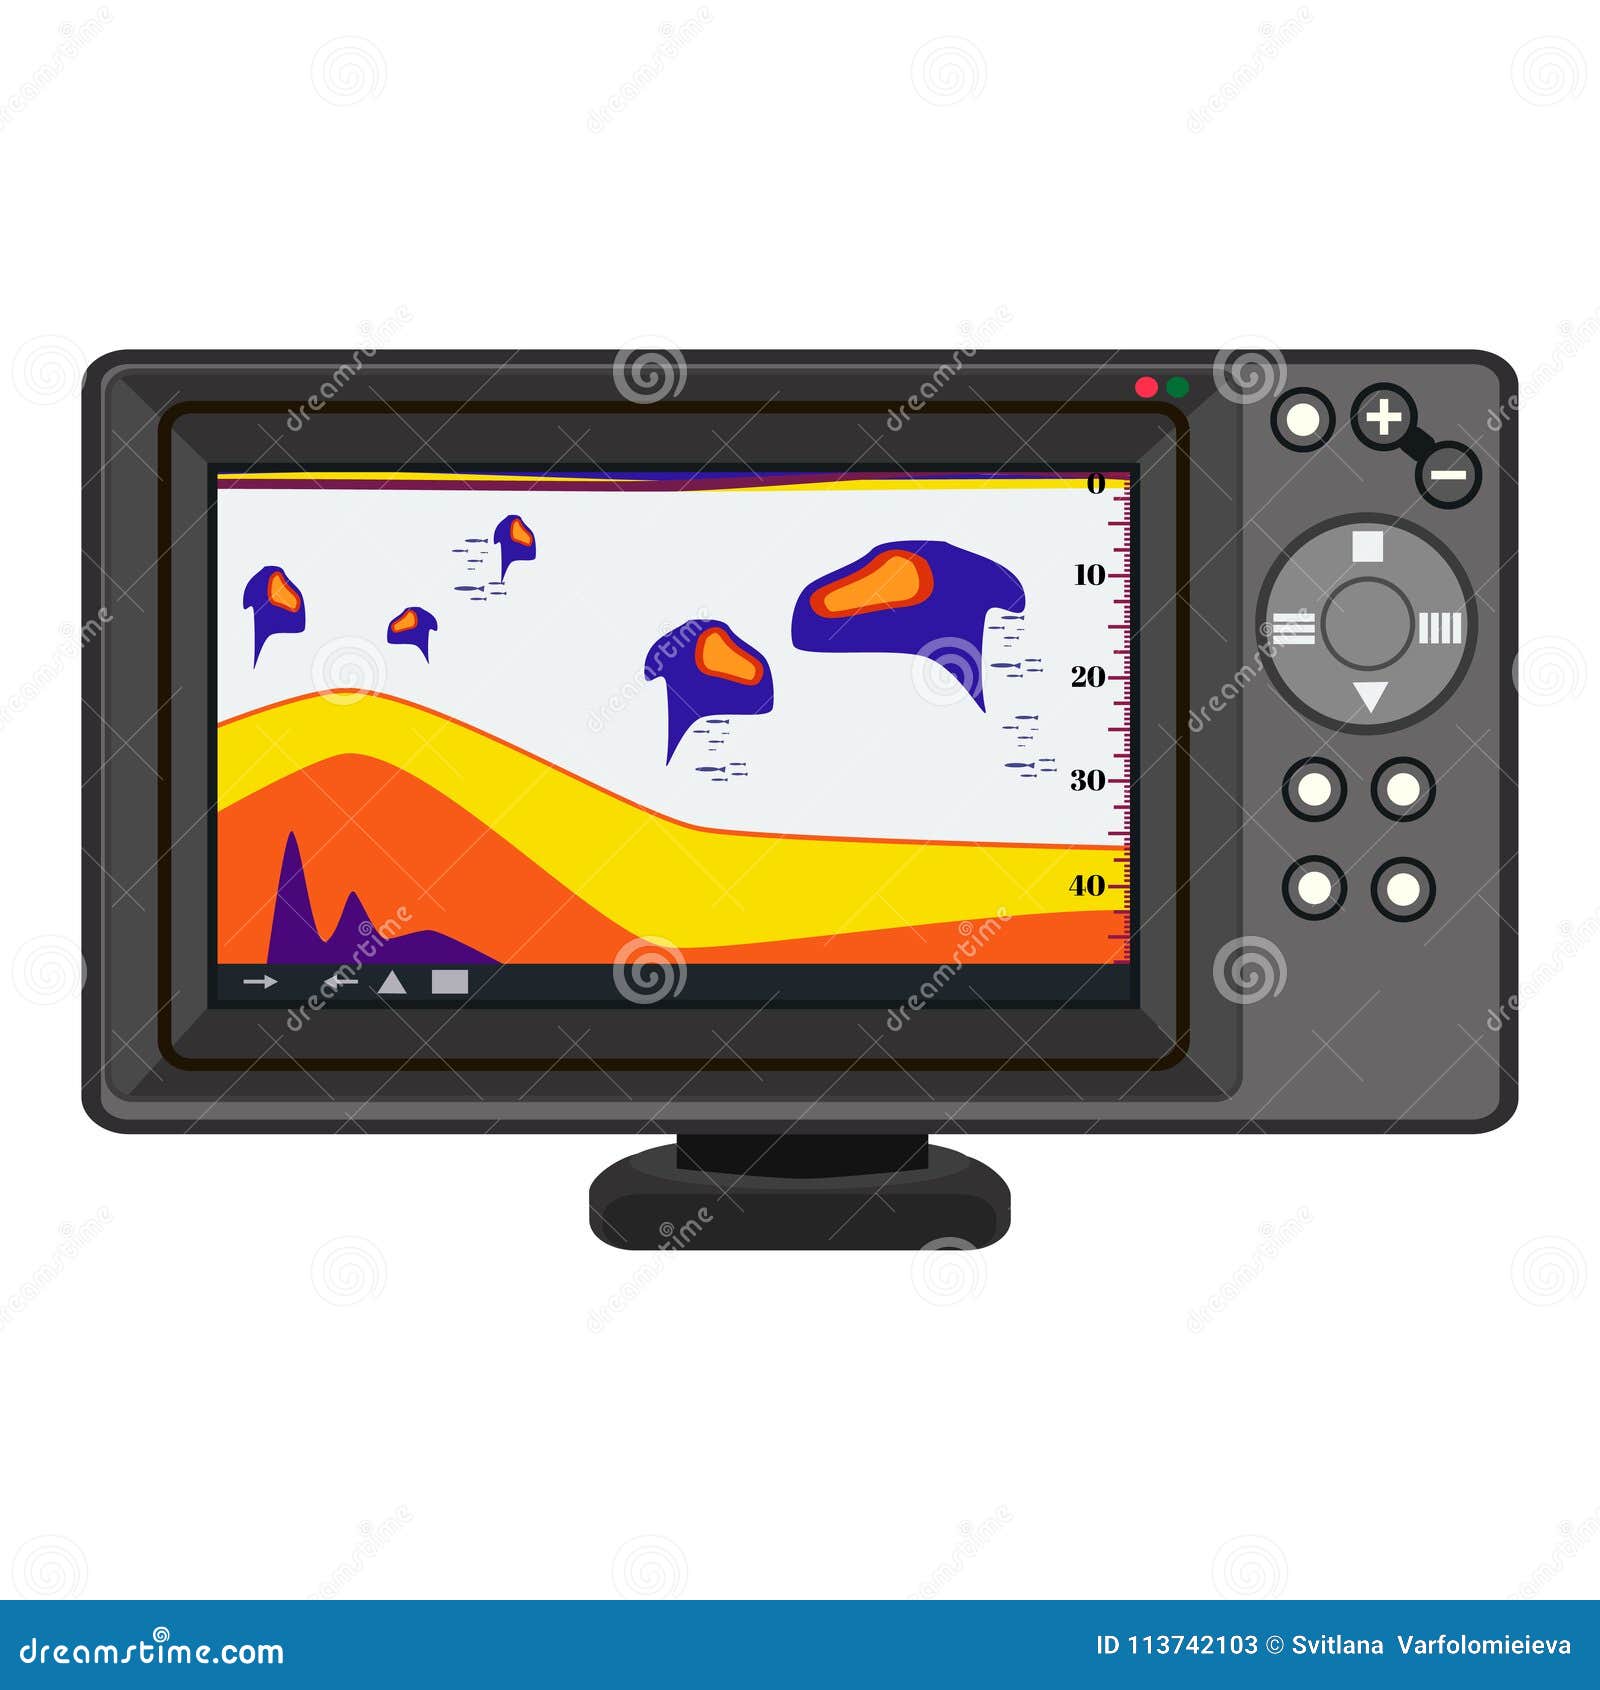 https://thumbs.dreamstime.com/z/fish-finder-echo-sounder-vector-illustration-electronic-equipment-fishing-isolated-white-background-113742103.jpg